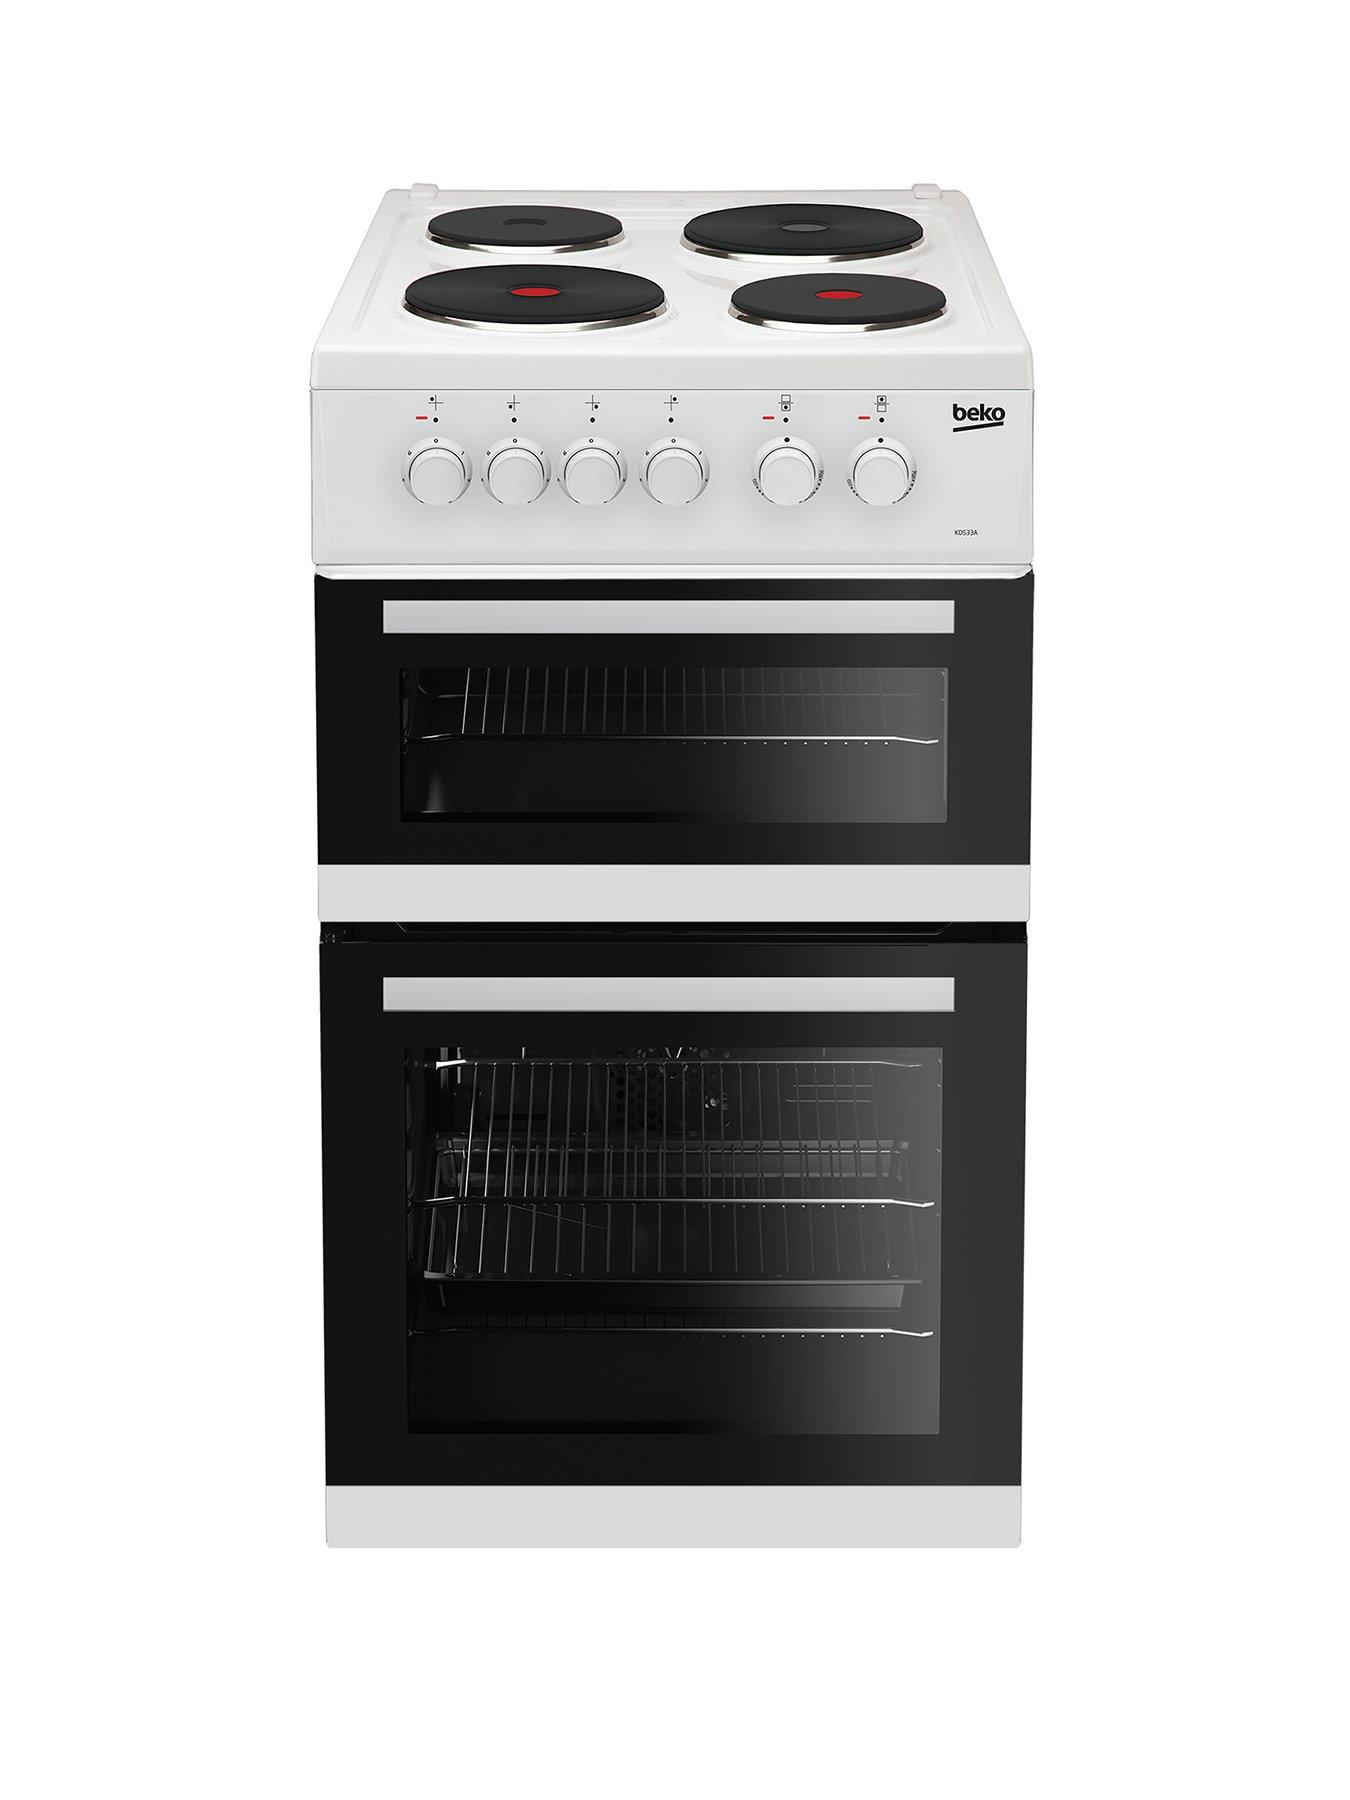 Beko Kd533Aw 50Cm Twin Cavity Electric Cooker – White With Connection